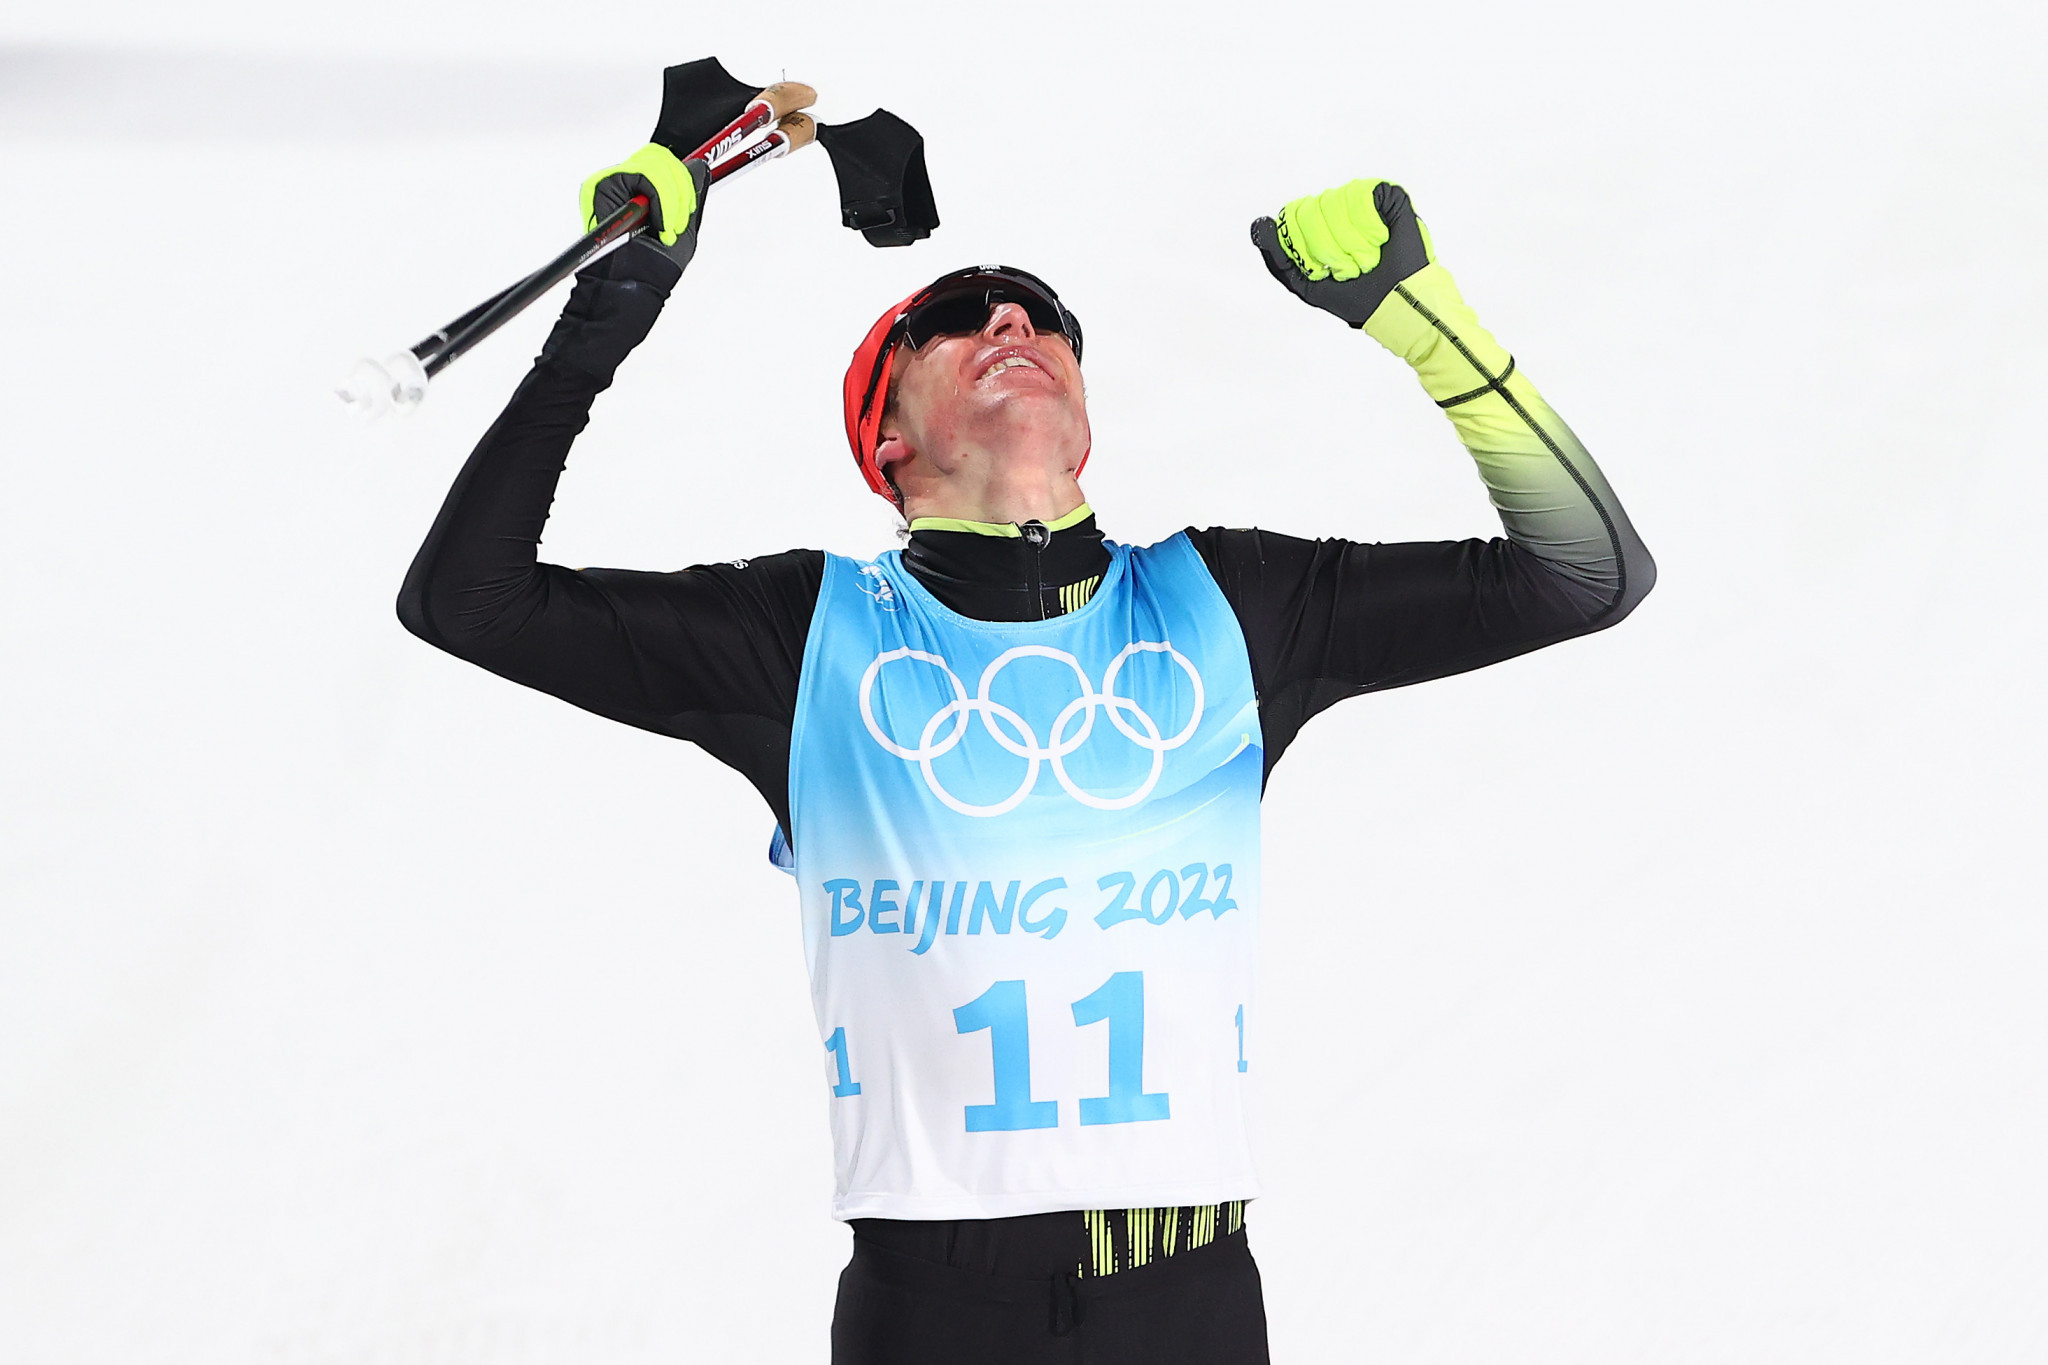 Geiger's late burst earns normal hill Nordic combined gold at Beijing 2022